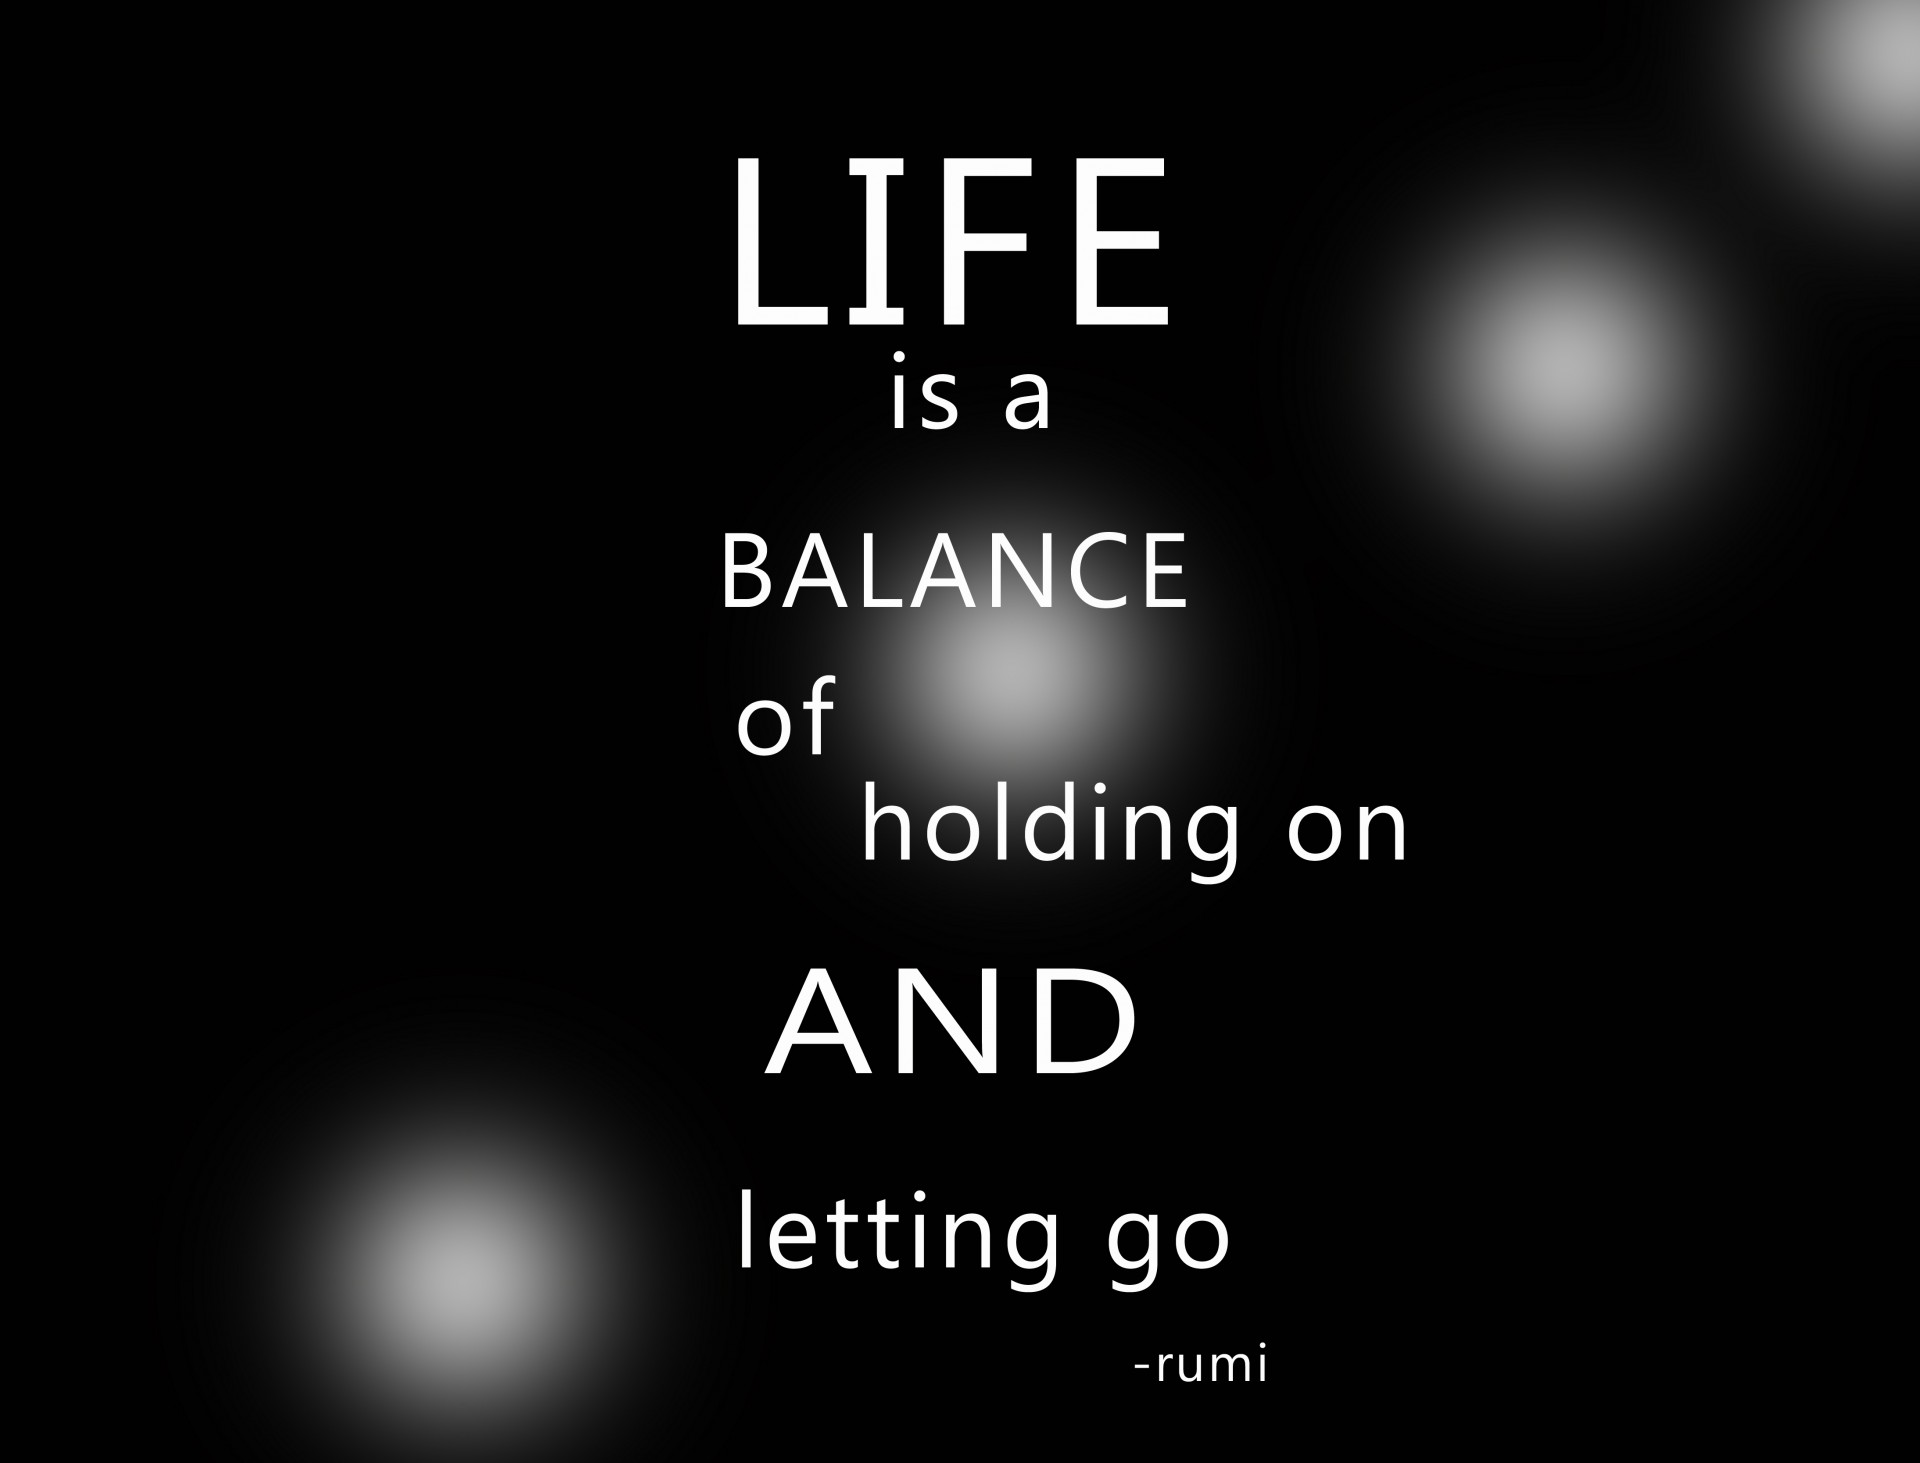 Let me life my life. Quotes about Life. Let it be картинки. Balance quotes. Let it be обои черные.